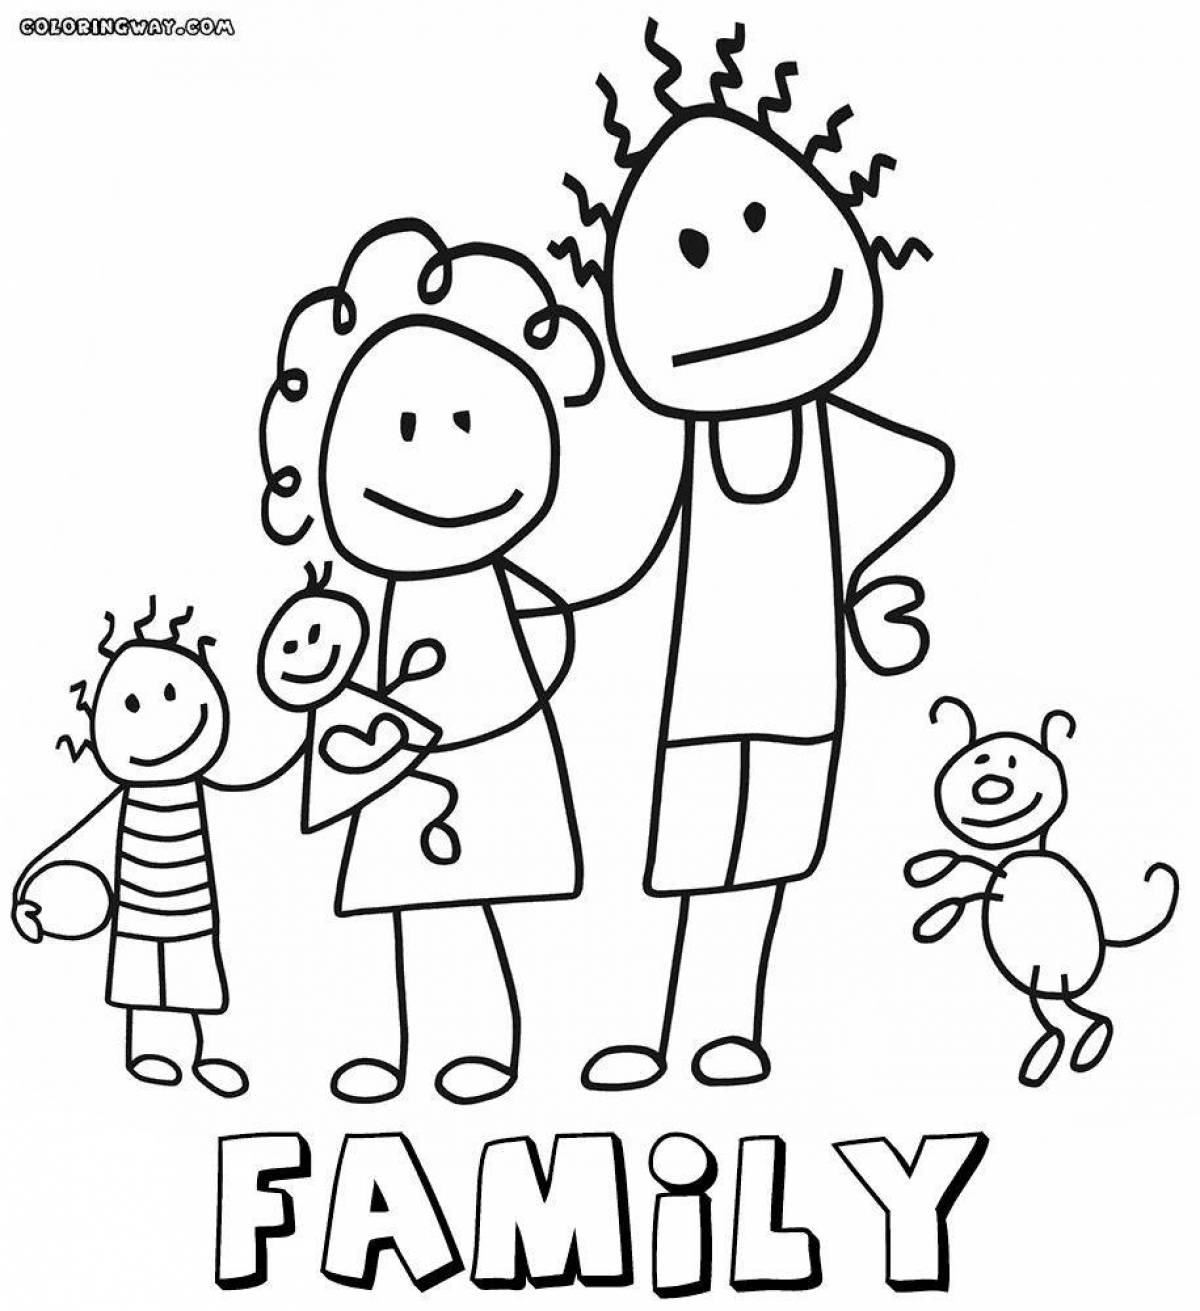 Coloring page funny mom and dad